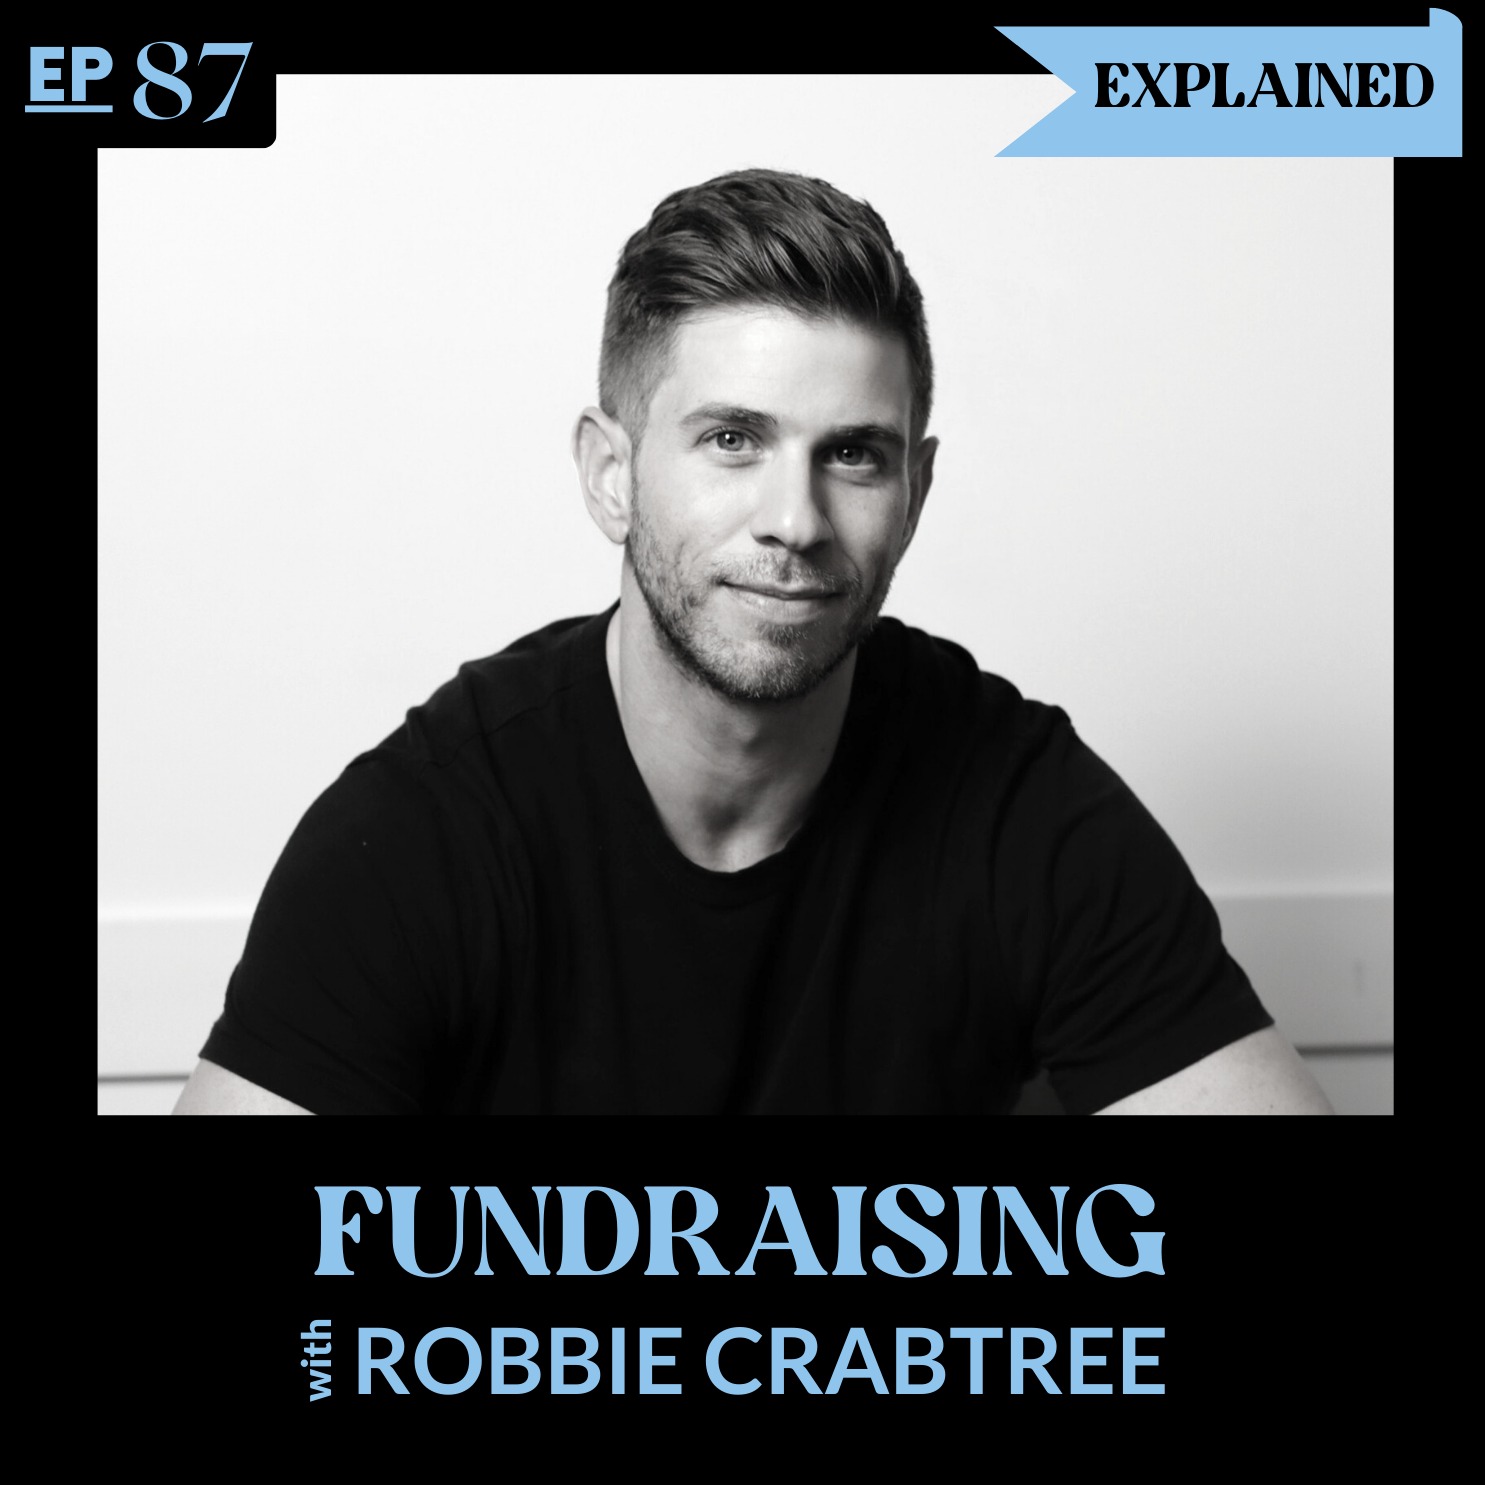 Fundraising EXPLAINED ft. Robbie Crabtree: Founder of Competitive Storytelling